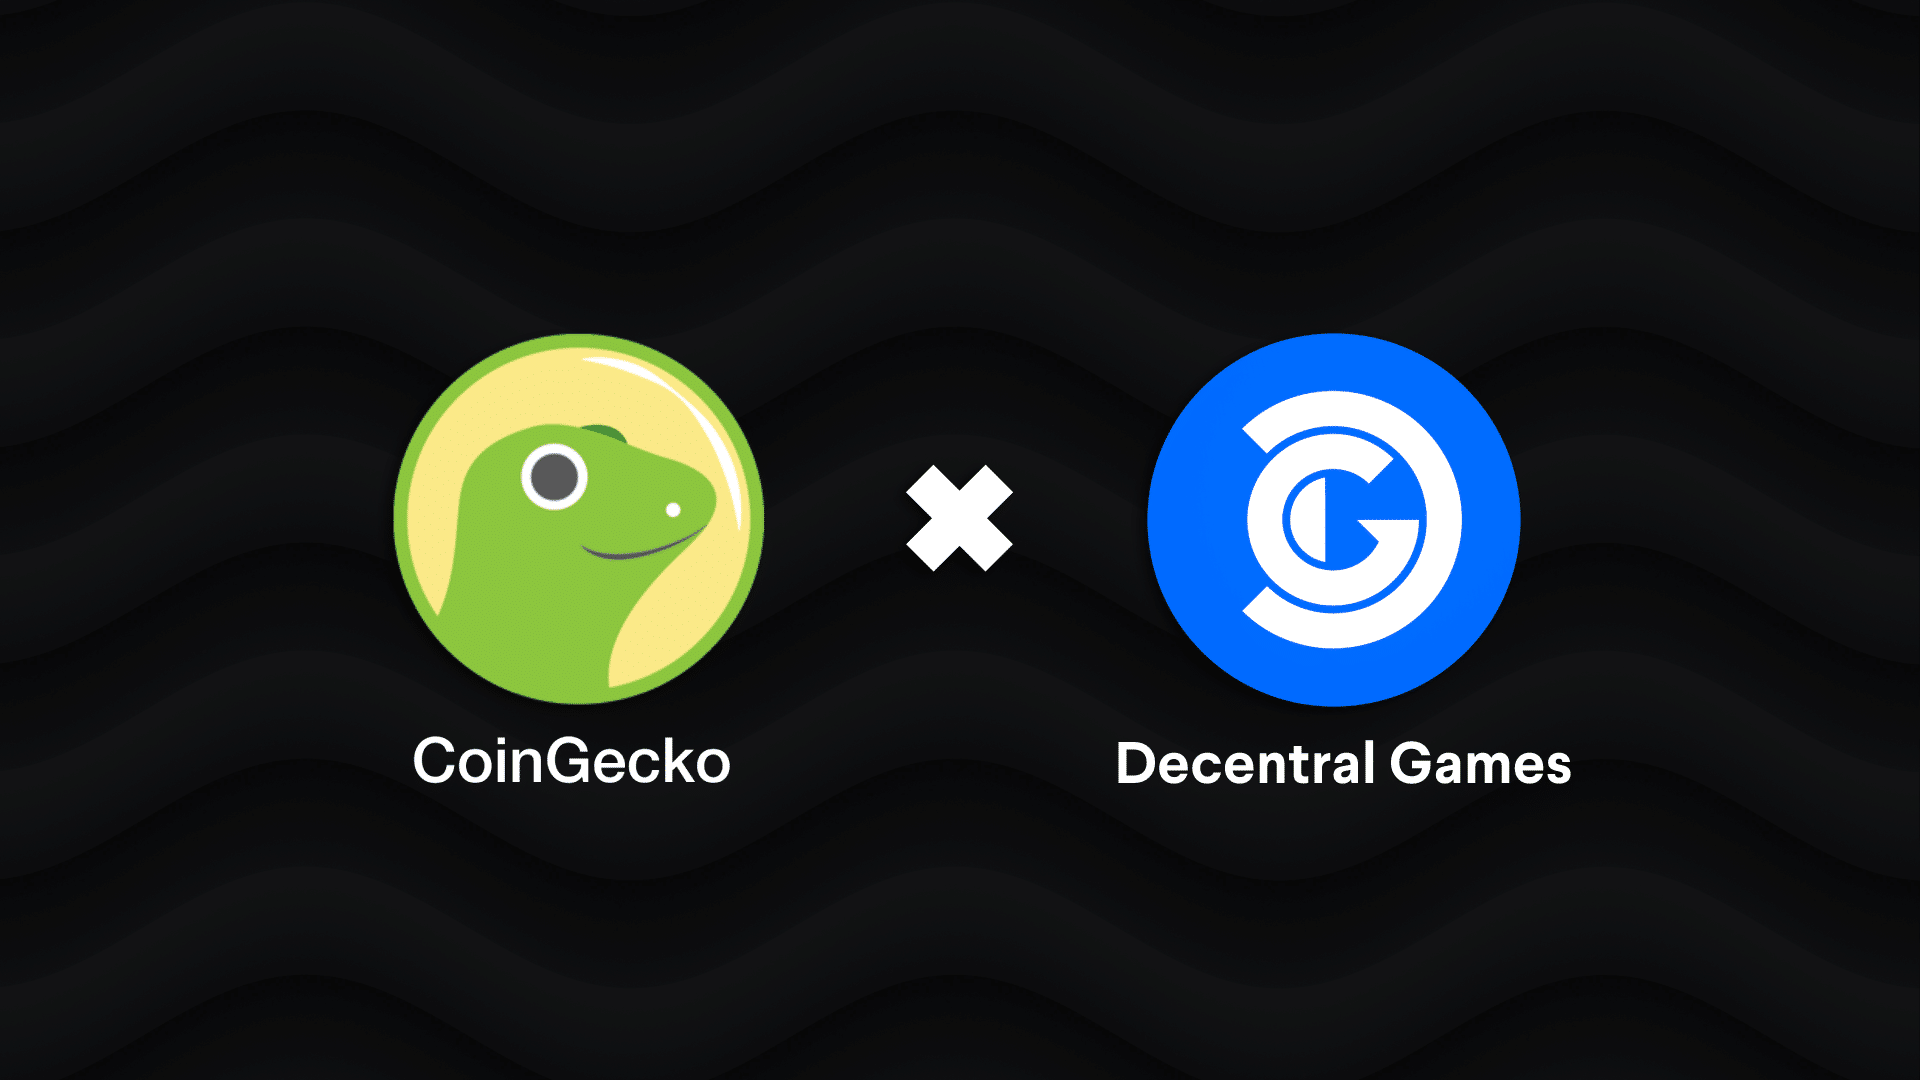 CoinGecko and Decentral Games logos